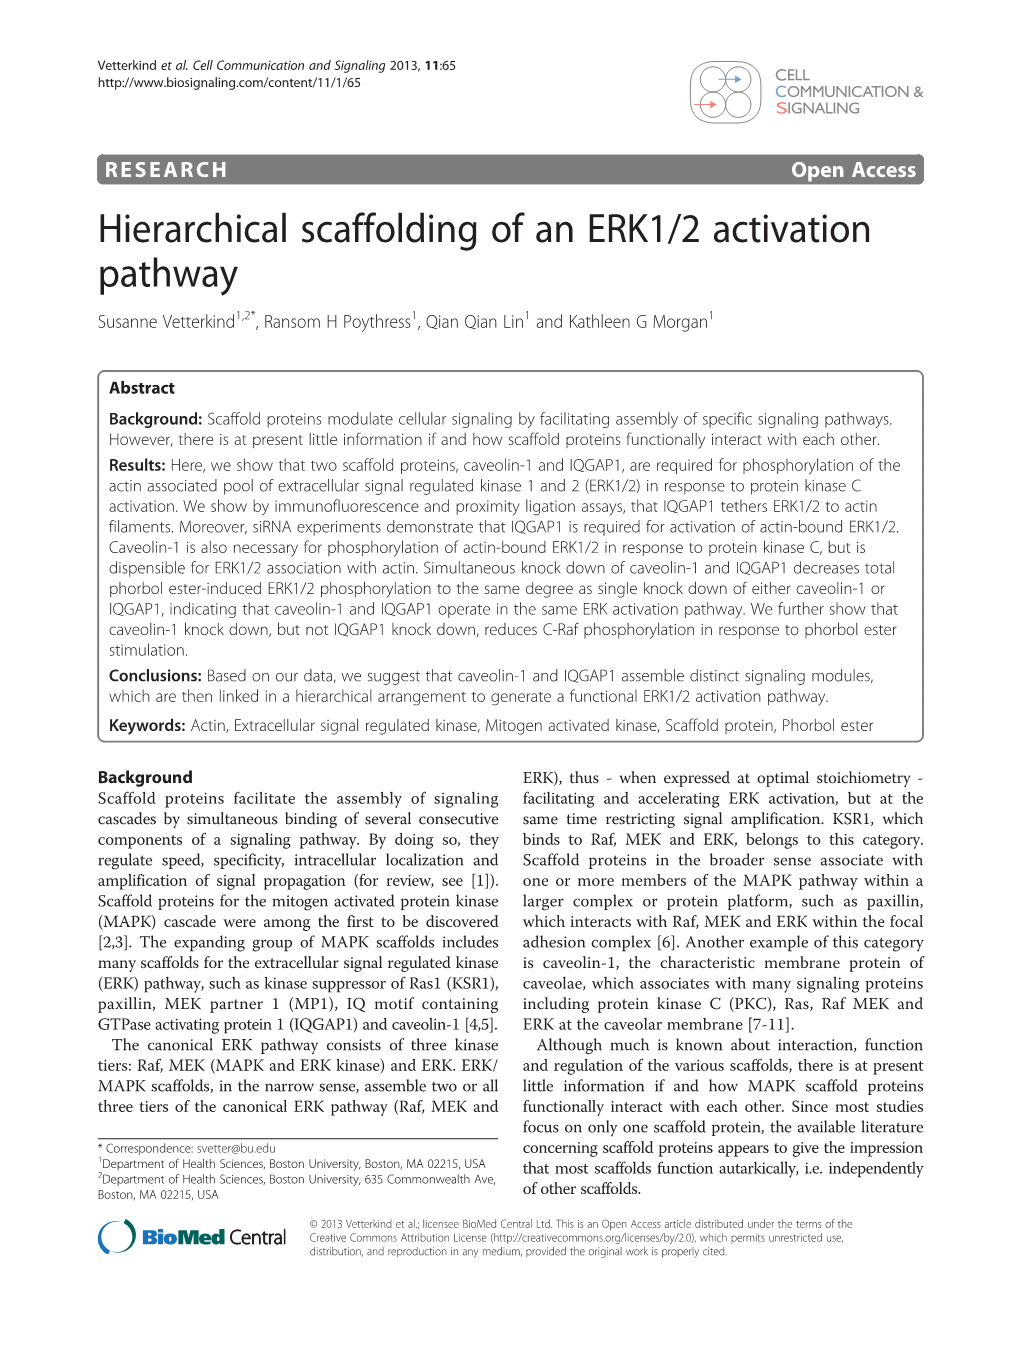 Hierarchical Scaffolding of an ERK1/2 Activation Pathway Susanne Vetterkind1,2*, Ransom H Poythress1, Qian Qian Lin1 and Kathleen G Morgan1